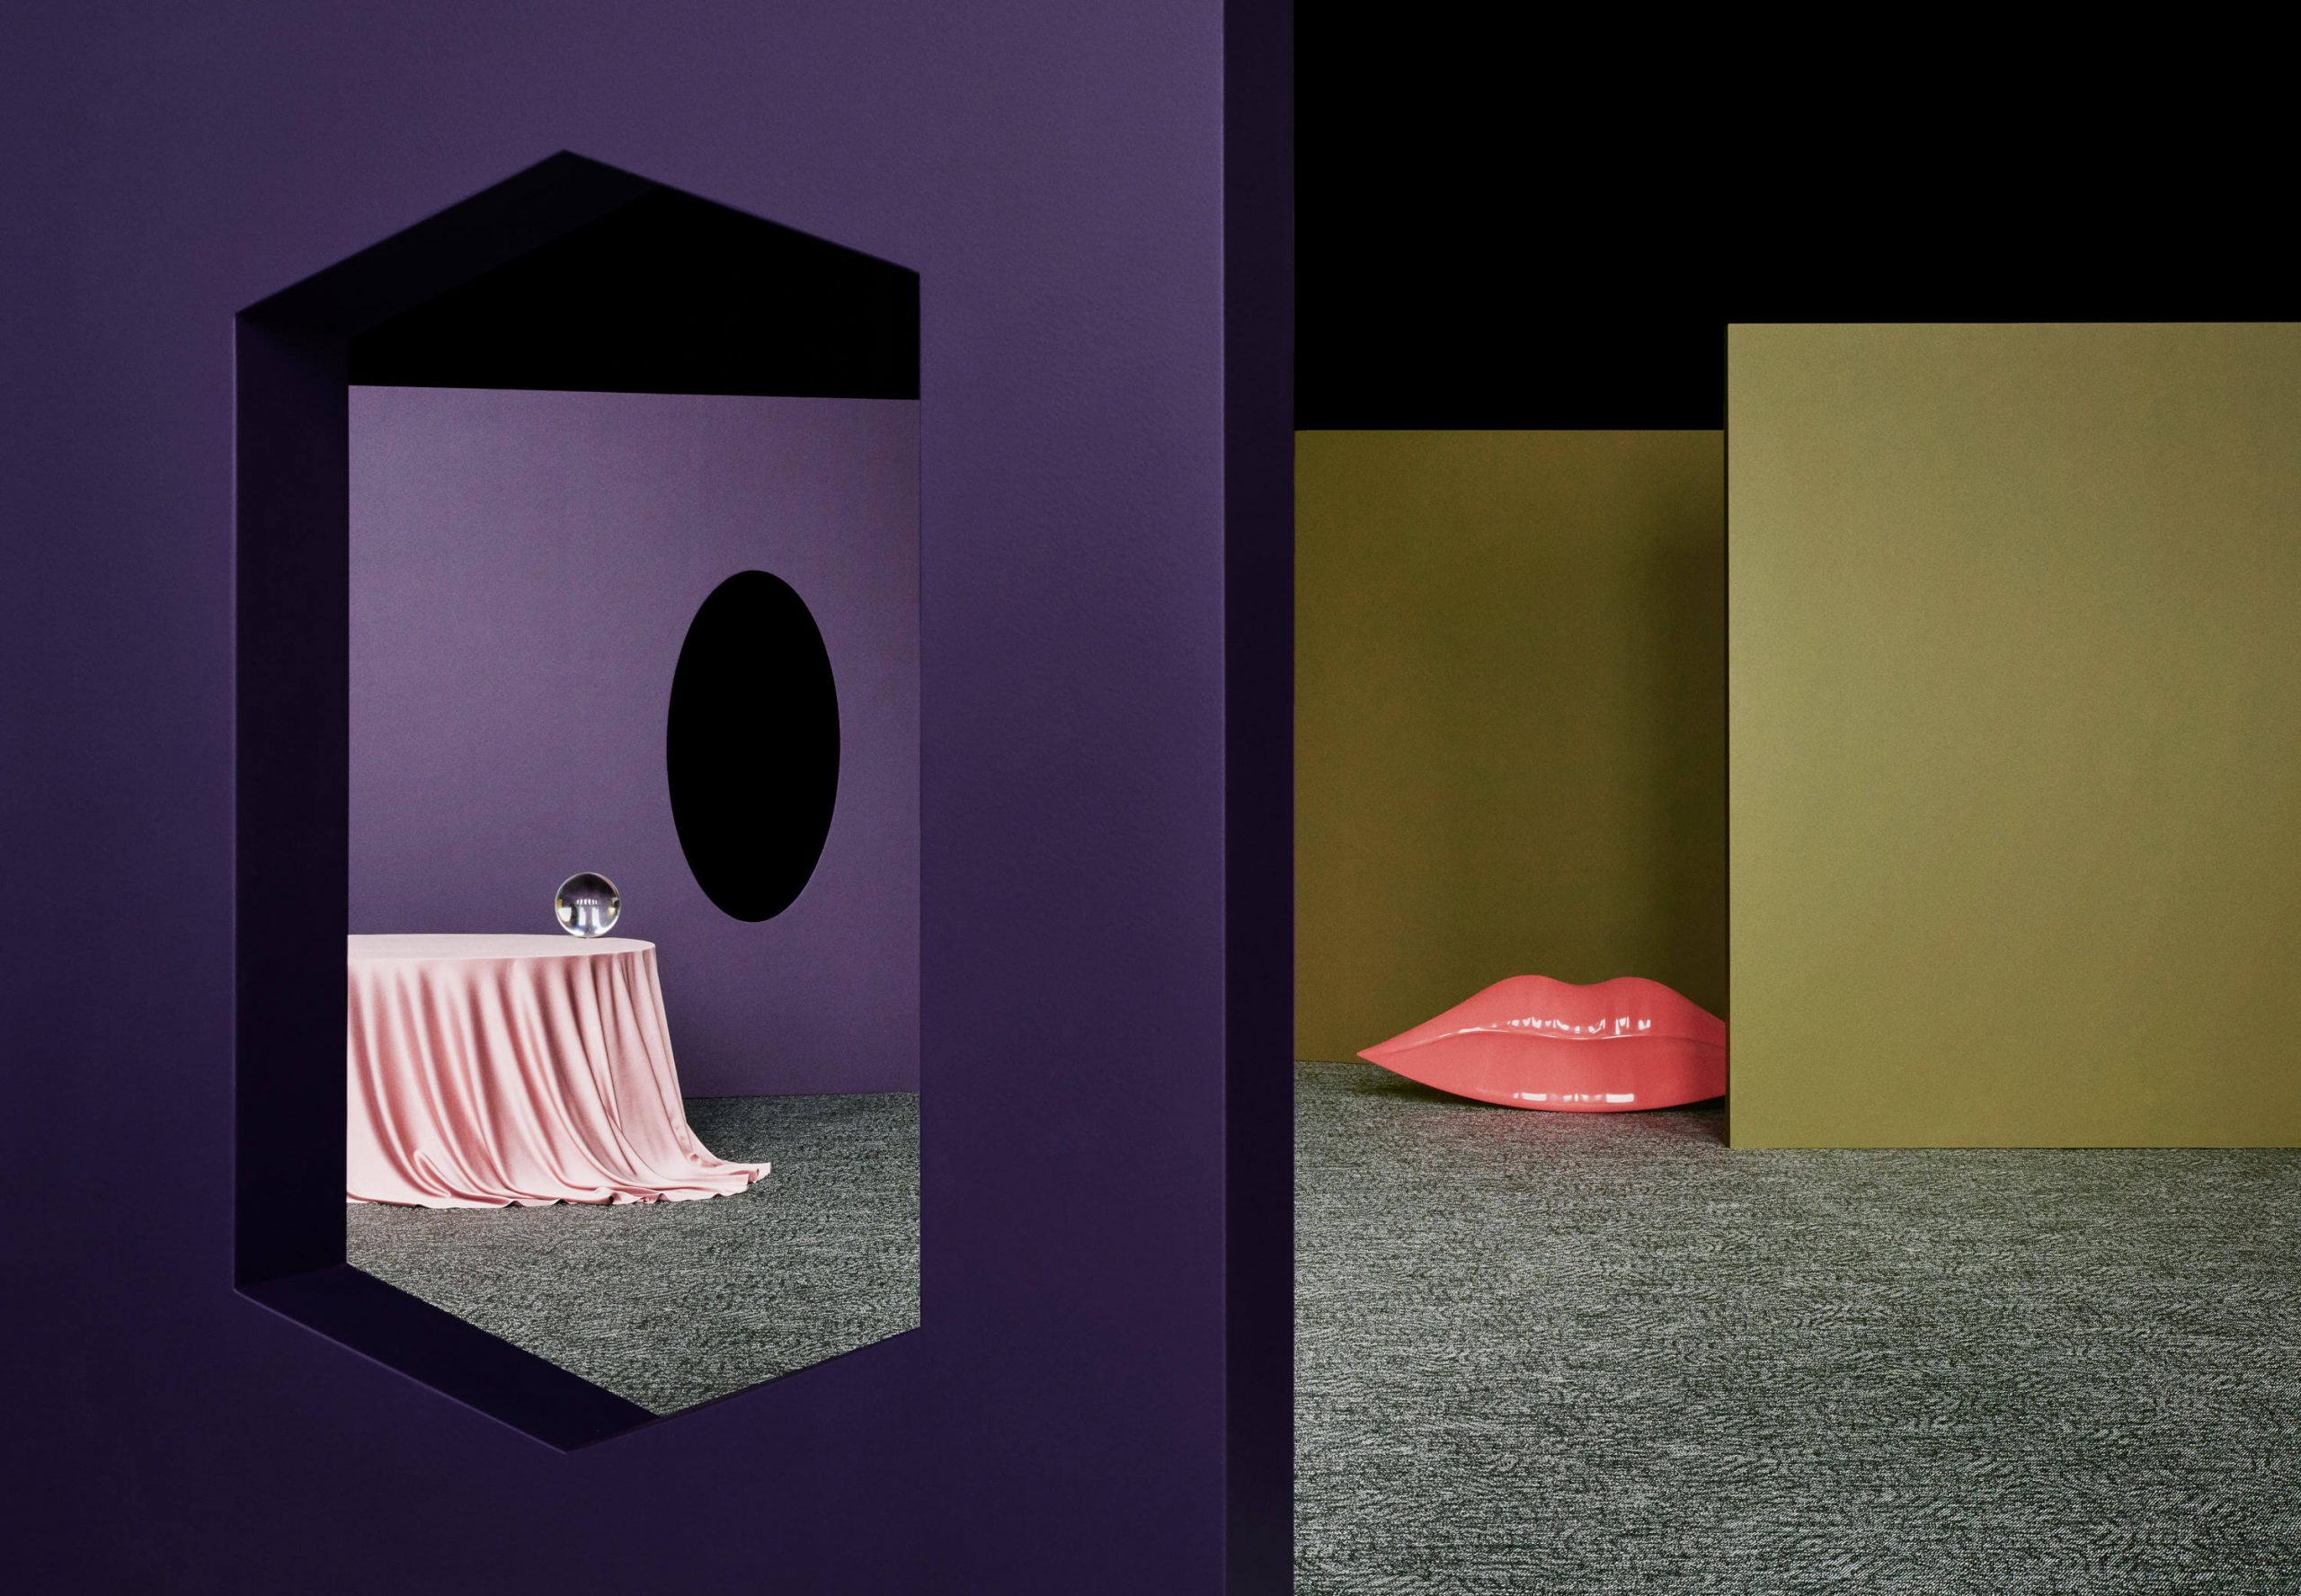 In 2019, Bolon Celebrates Diversity With a New Collection